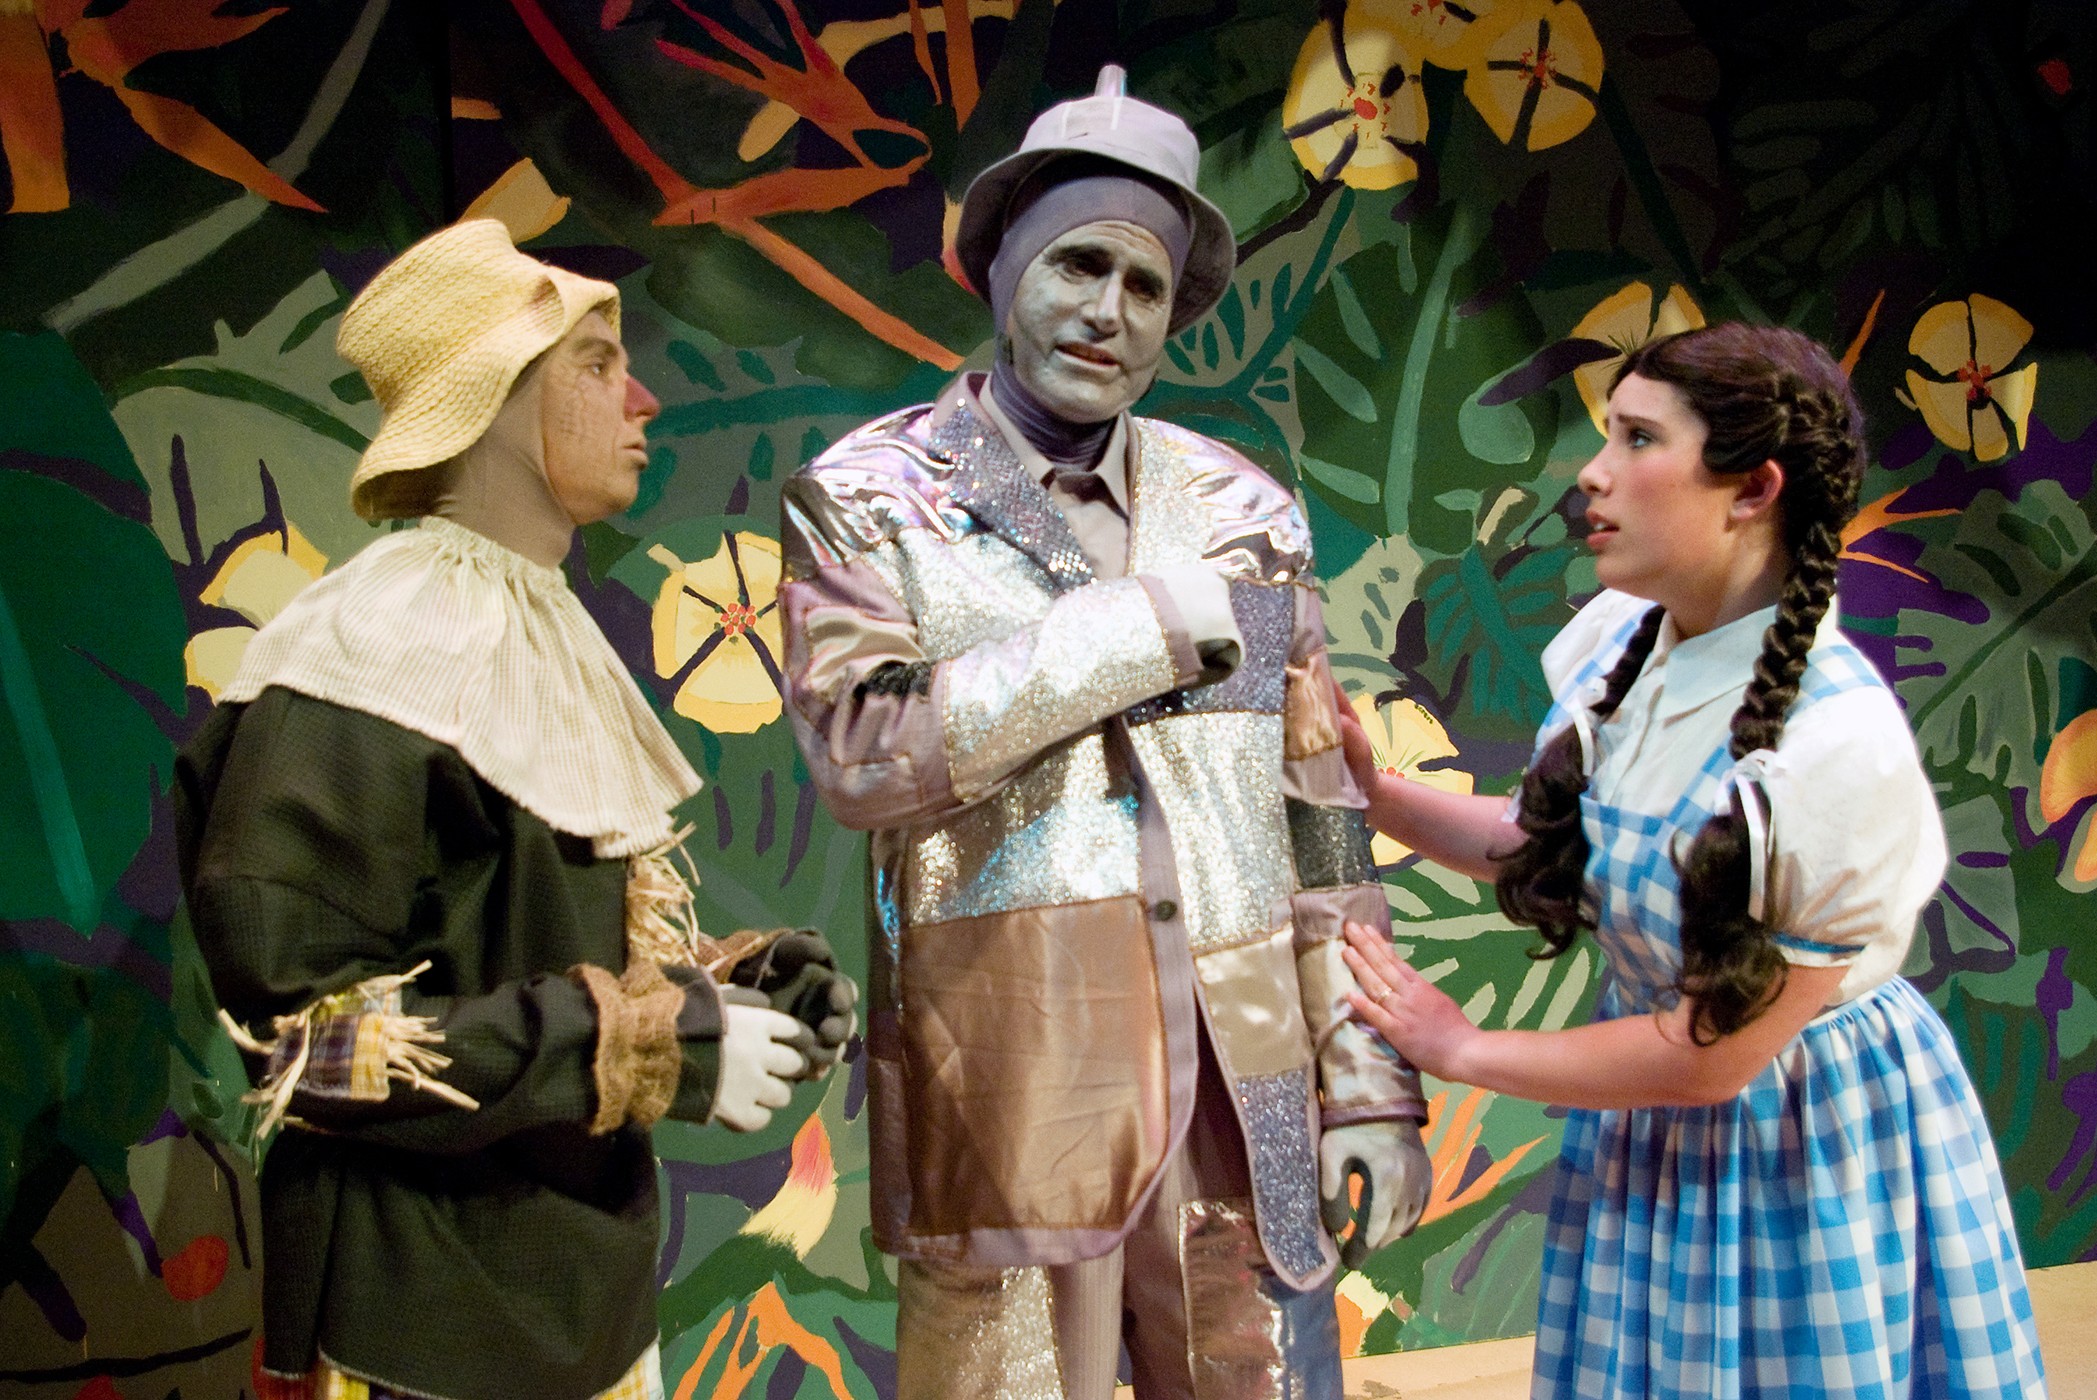 Tyler Rich, Bill Ryder and Fiona Ryder in "The Wizard of Oz" - COURTESY OF HLOC